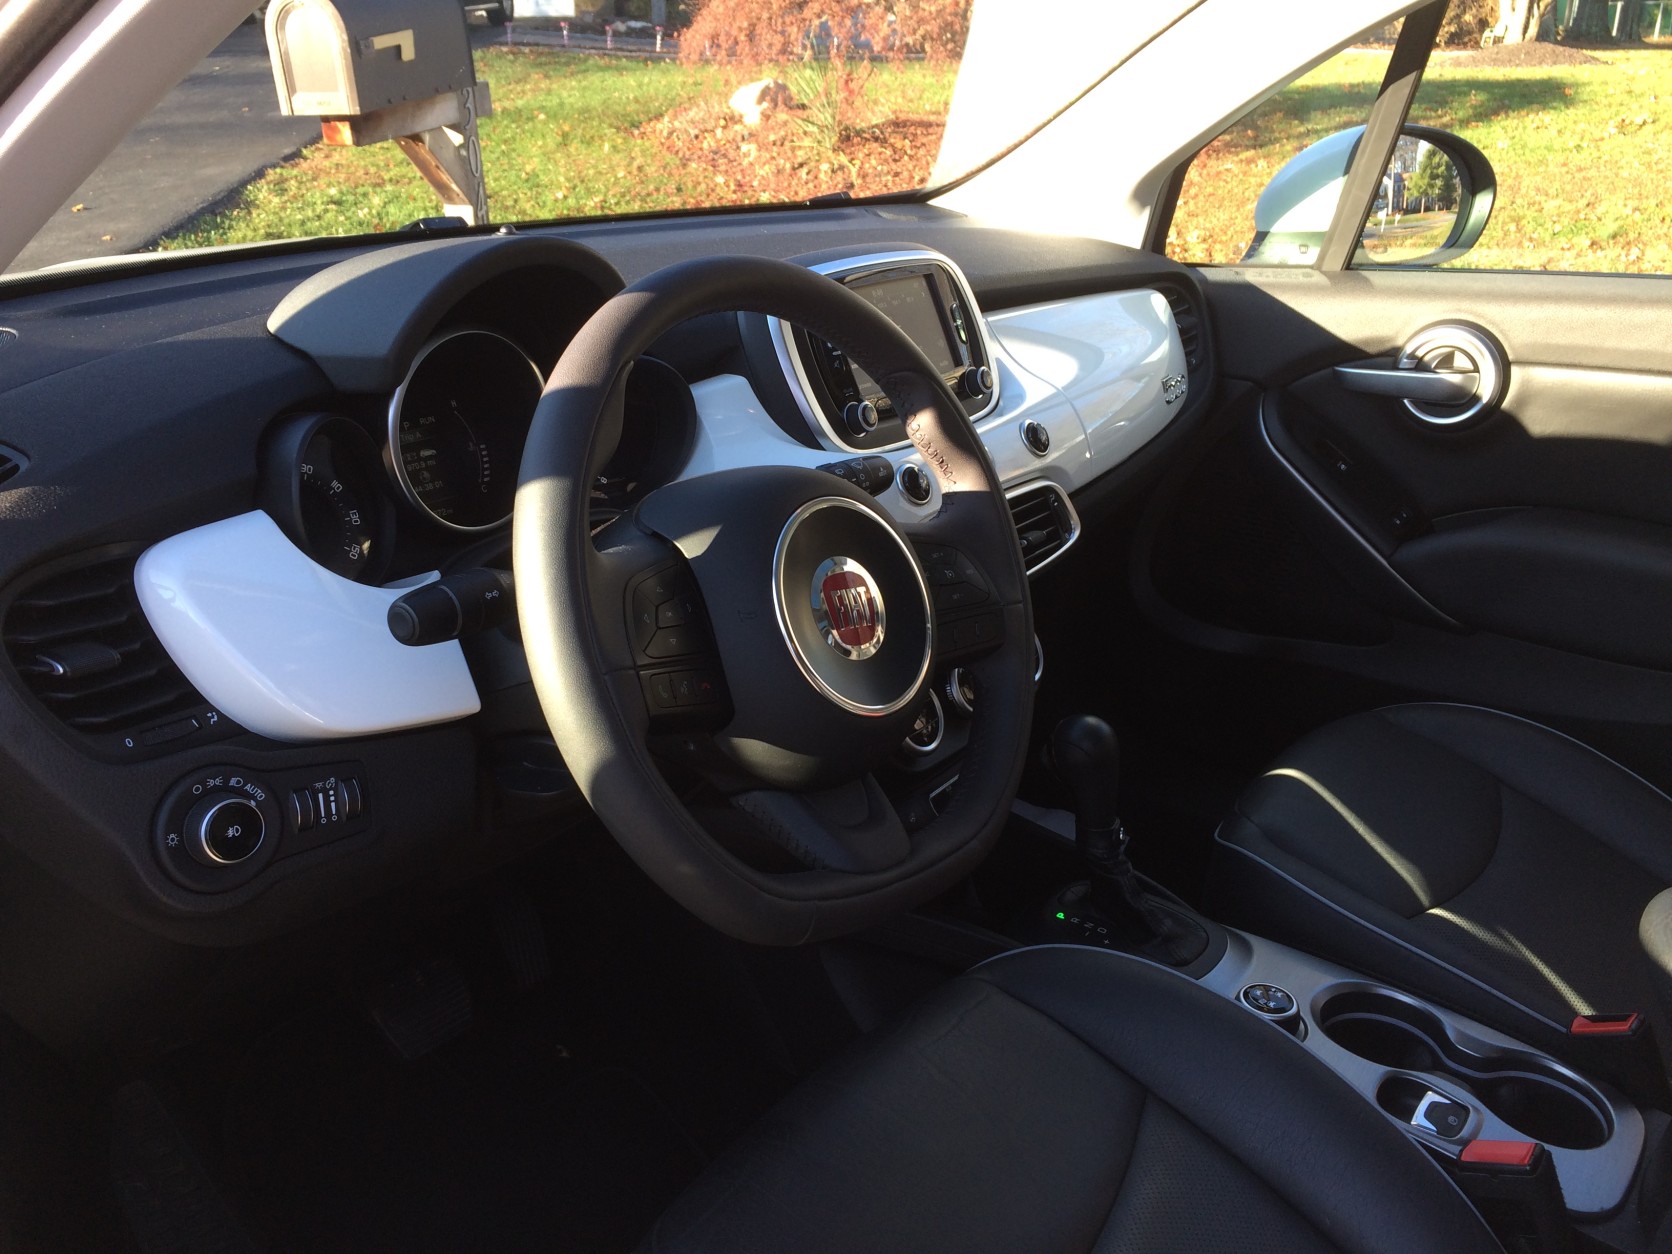 The interior is a step up for Fiat vehicles in general. The materials are nicer and closer to the competition in this new and growing class of little crossovers. (WTOP/Mike Parris)